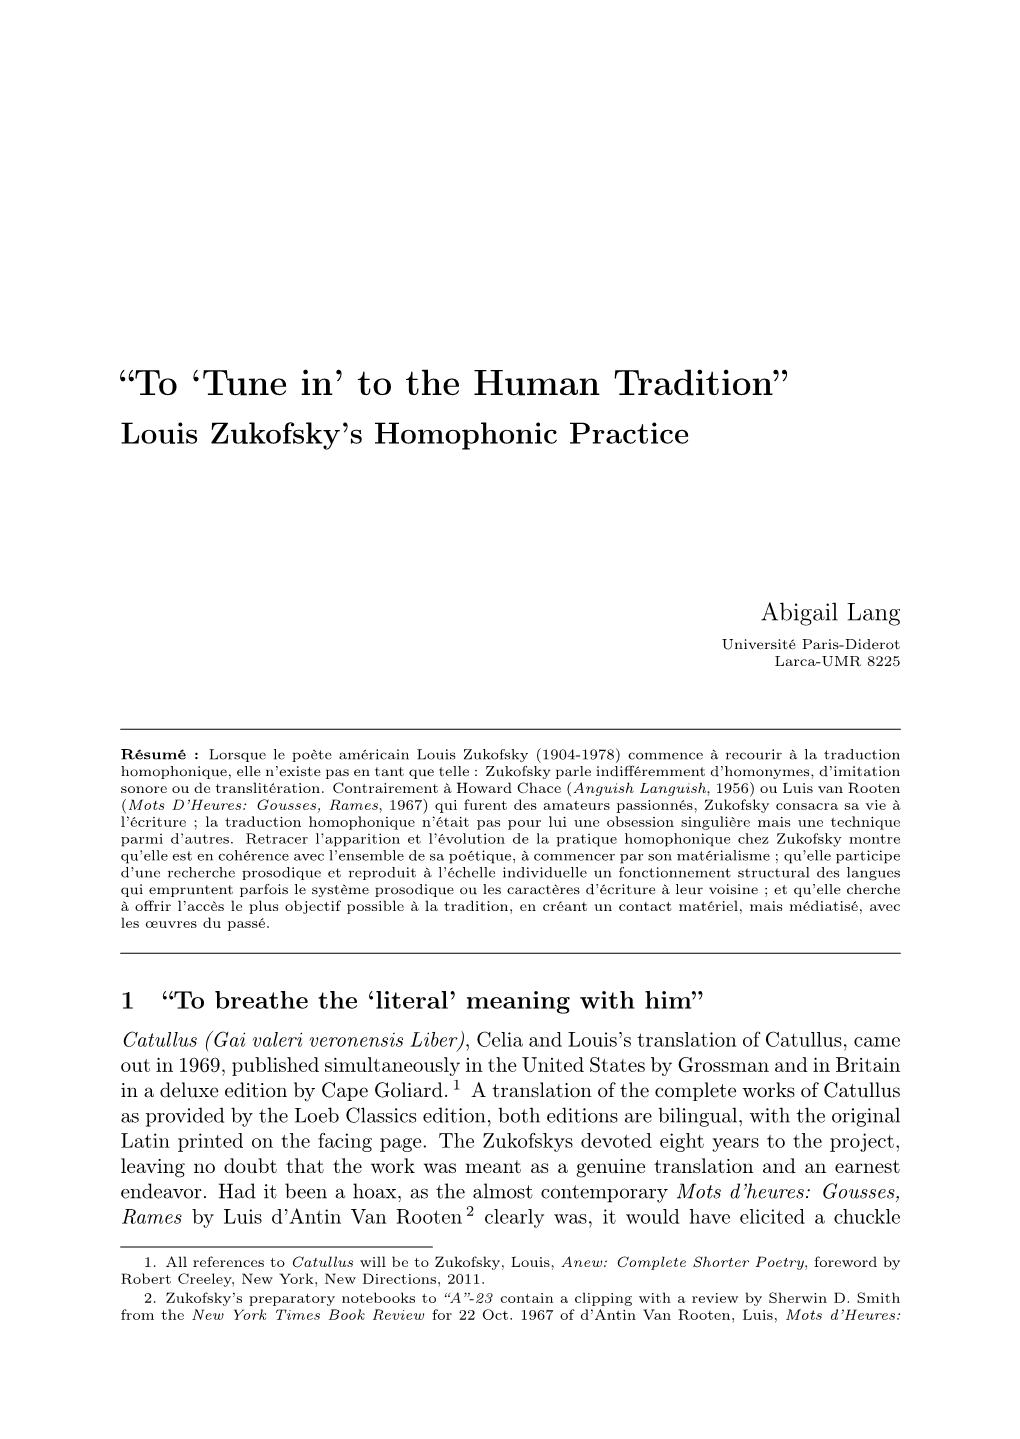 “To 'Tune In' to the Human Tradition”